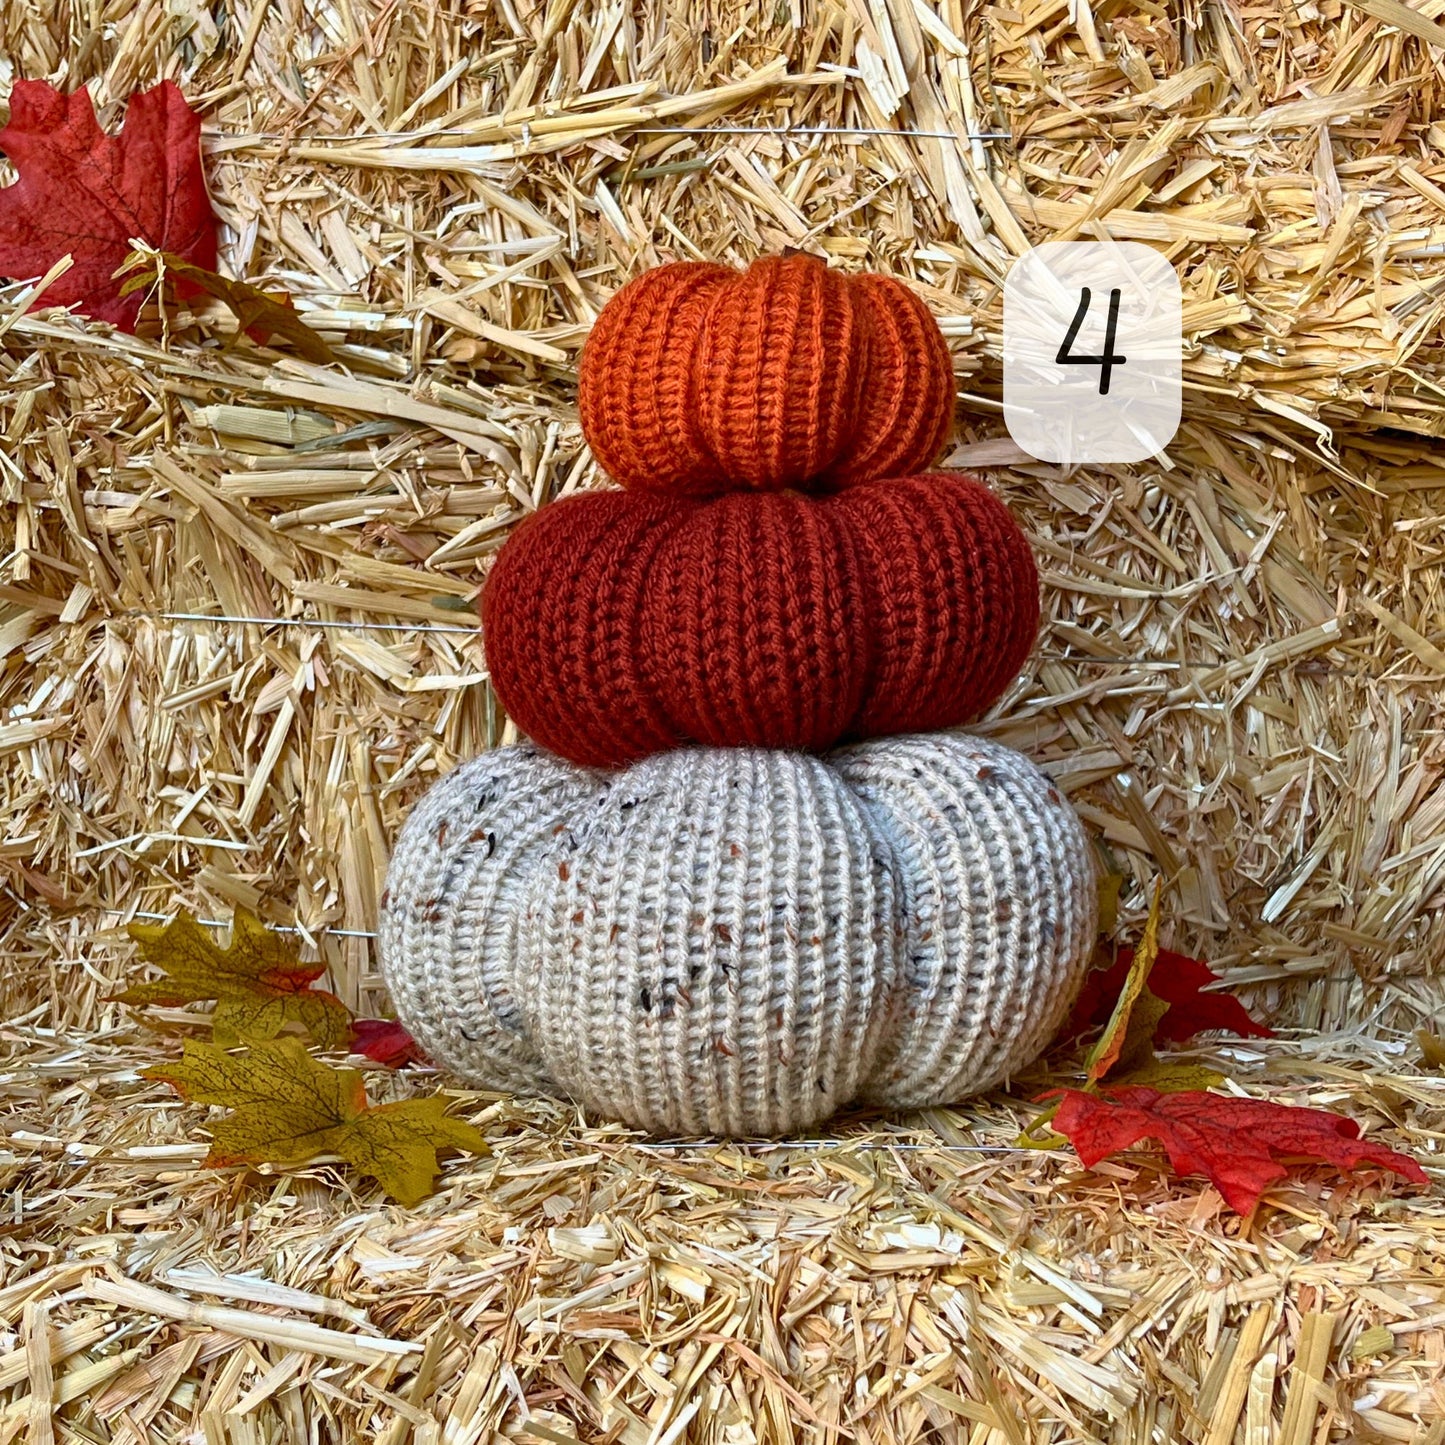 Fall Pumpkins / All Natural Autumn Tiered Tray Decor / Rustic Farmhouse Decorations